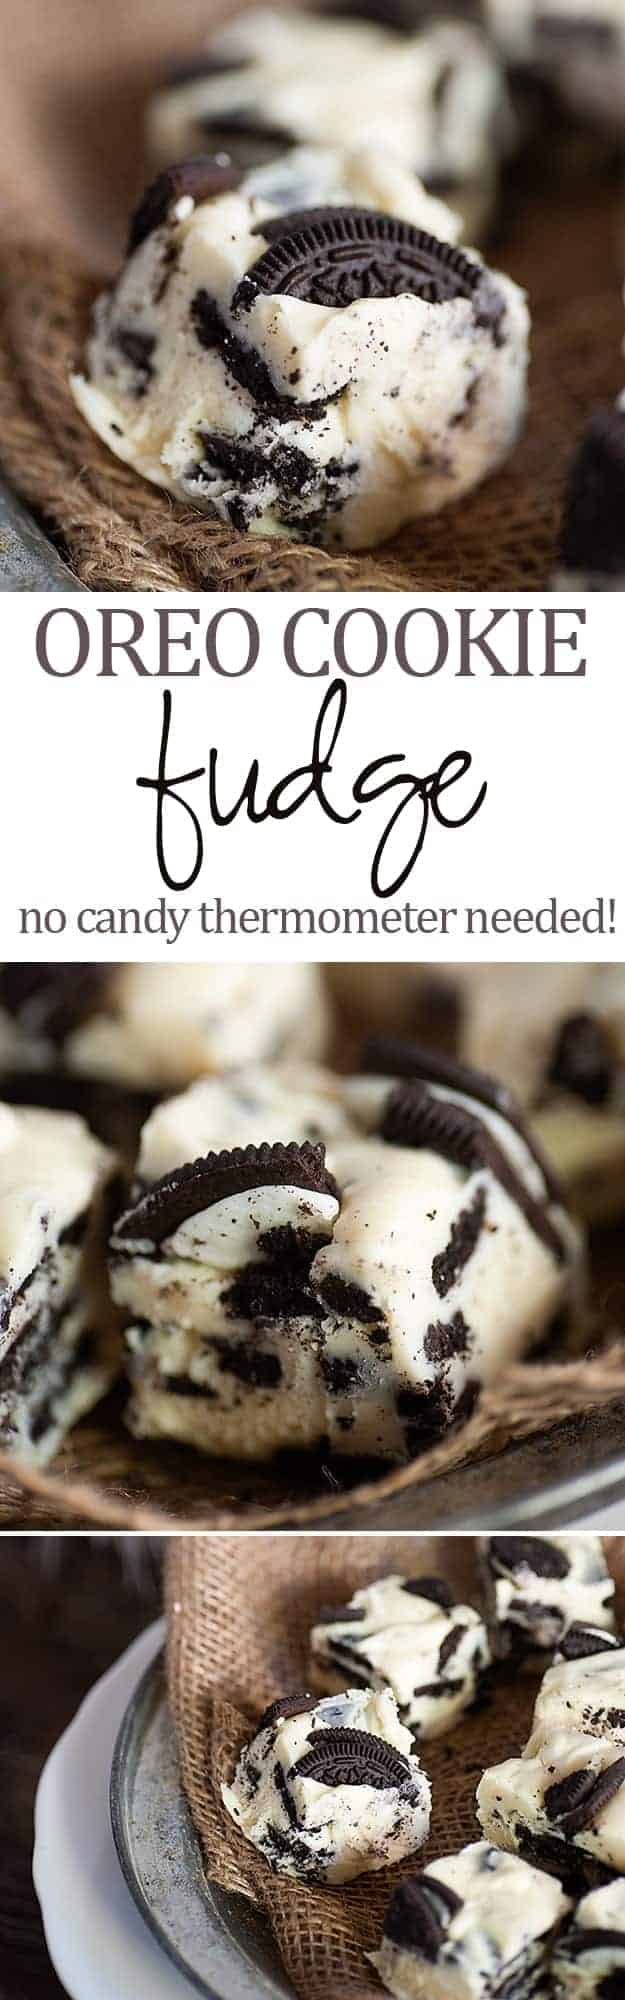 Easy 5 ingredient Oreo fudge recipe! Perfect for your Christmas cookie and candy tray!